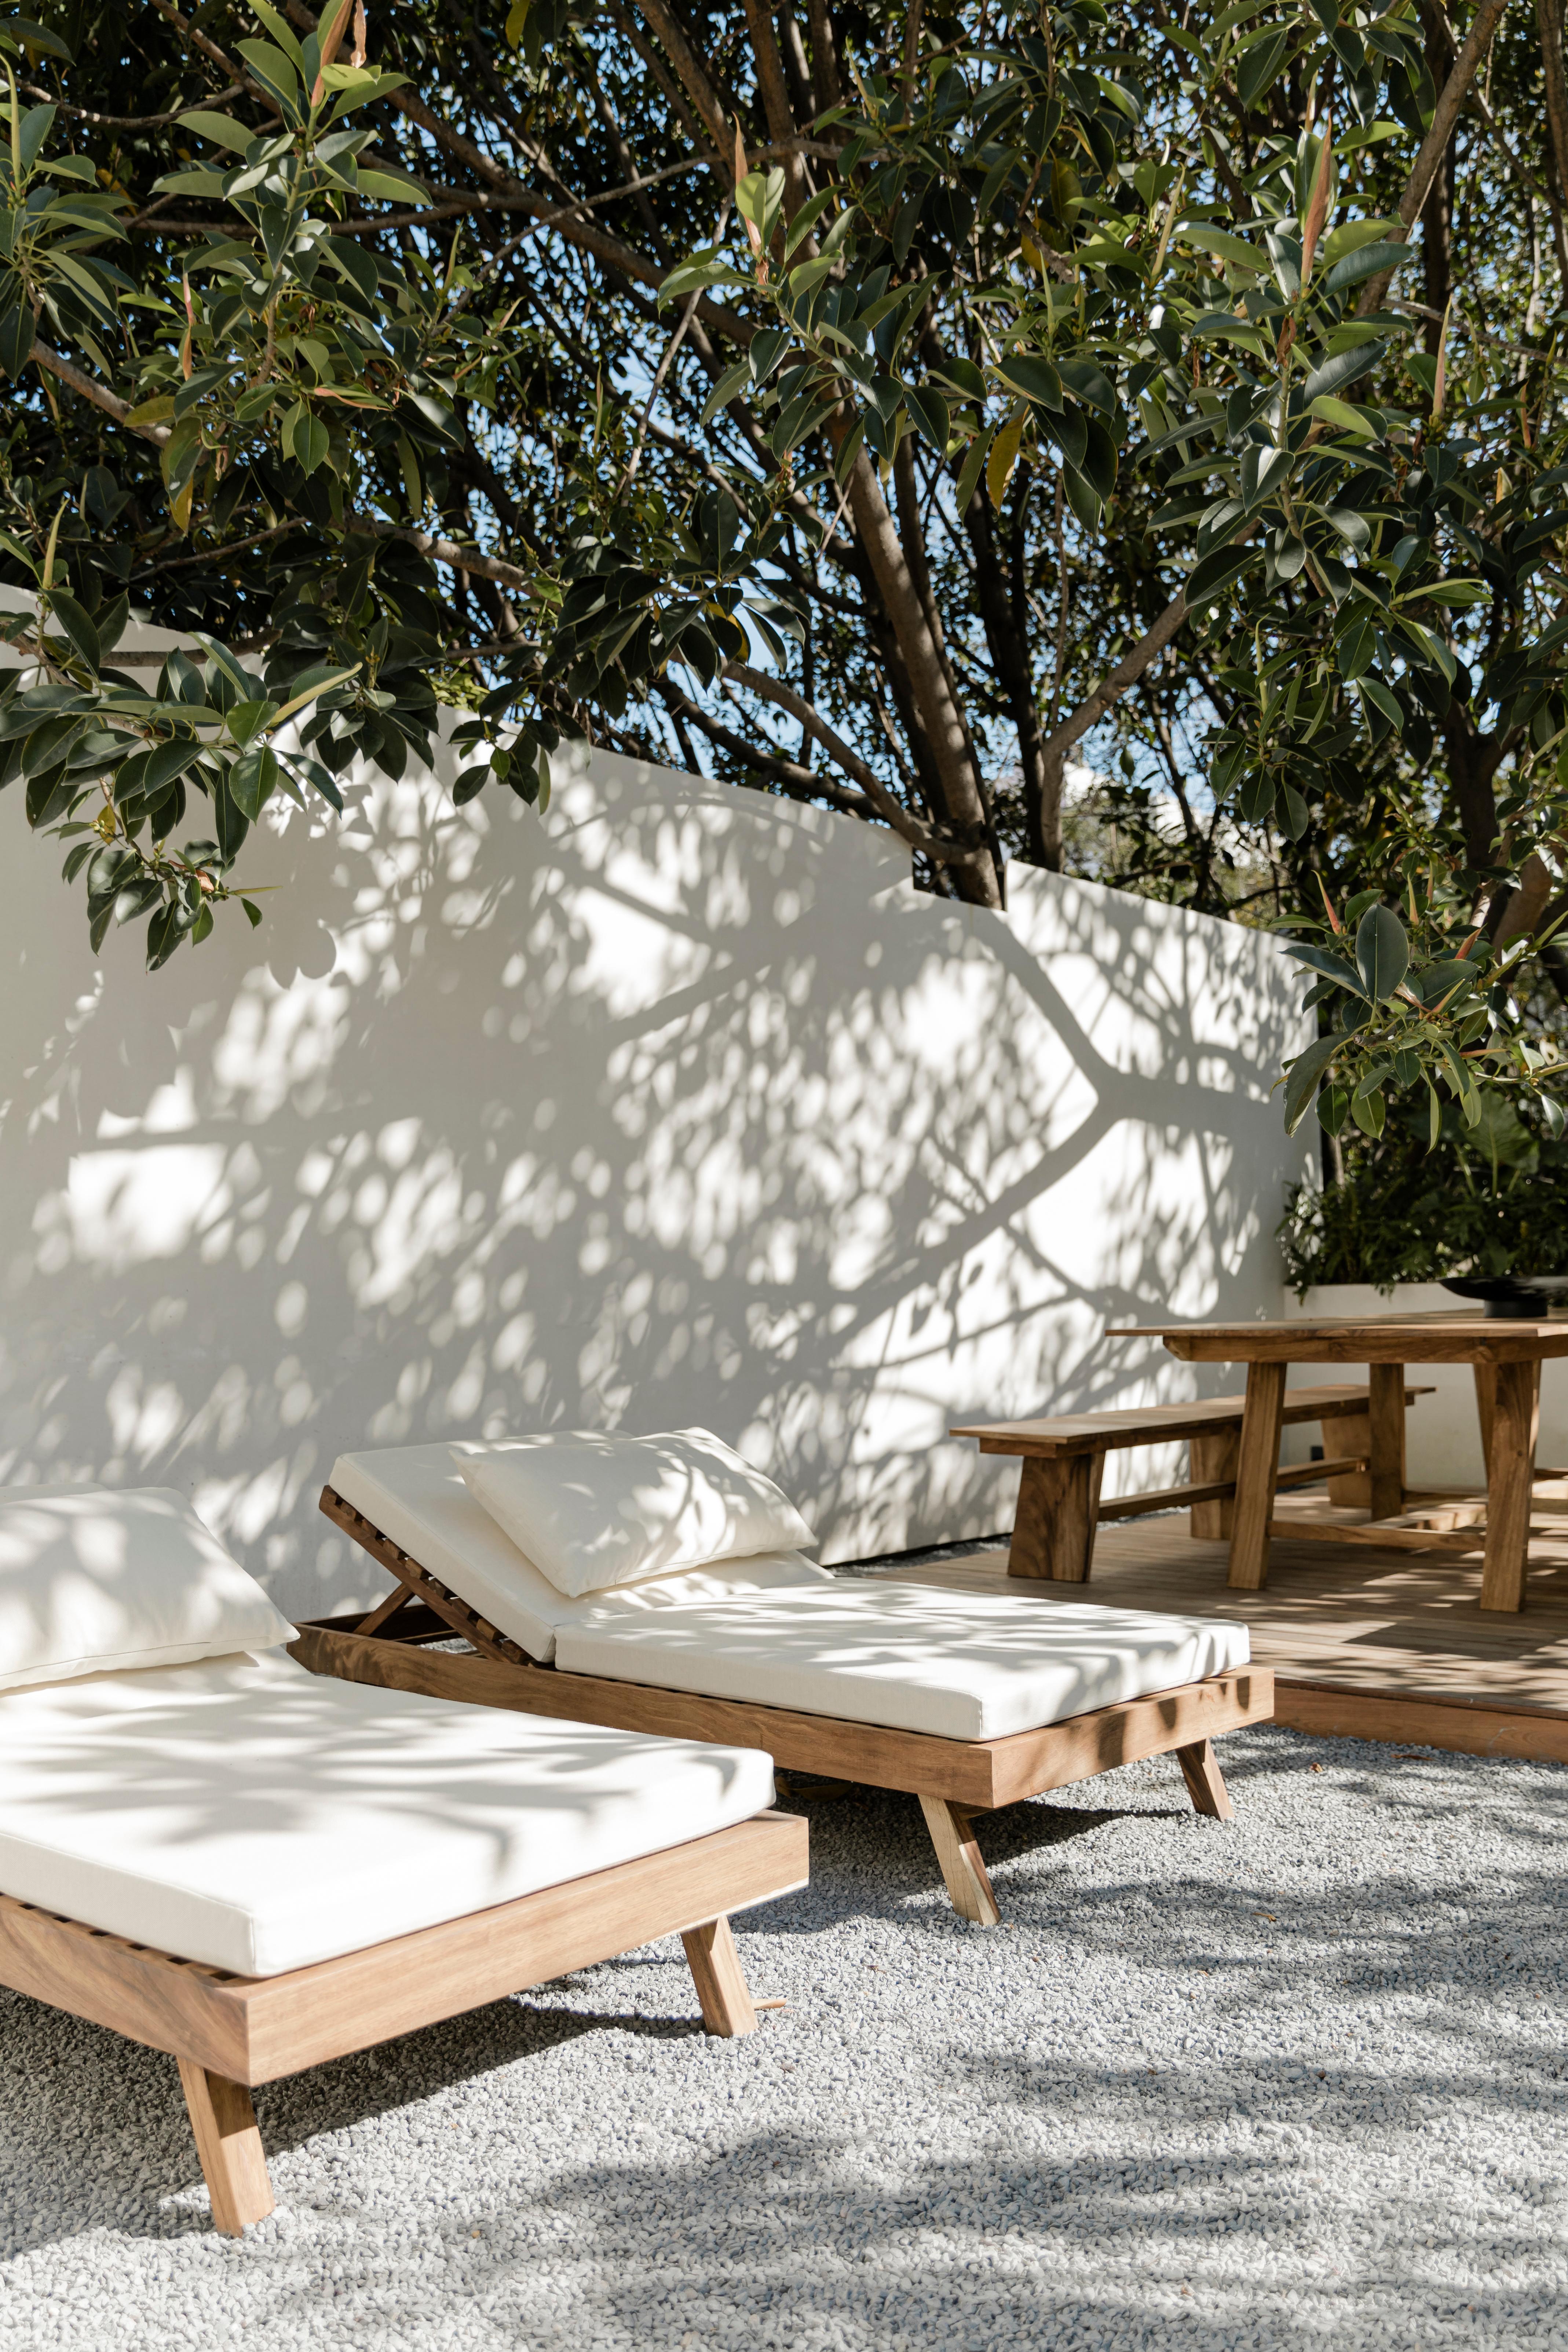 The Playamar Lounger is inspired by ingenious and rural furniture, with the purpose of enjoying life outdoors.

Production time: 6-8 weeks for items without marble / 13-14 weeks for marble pieces. Shipping +10 additional business days. Casa Quieta